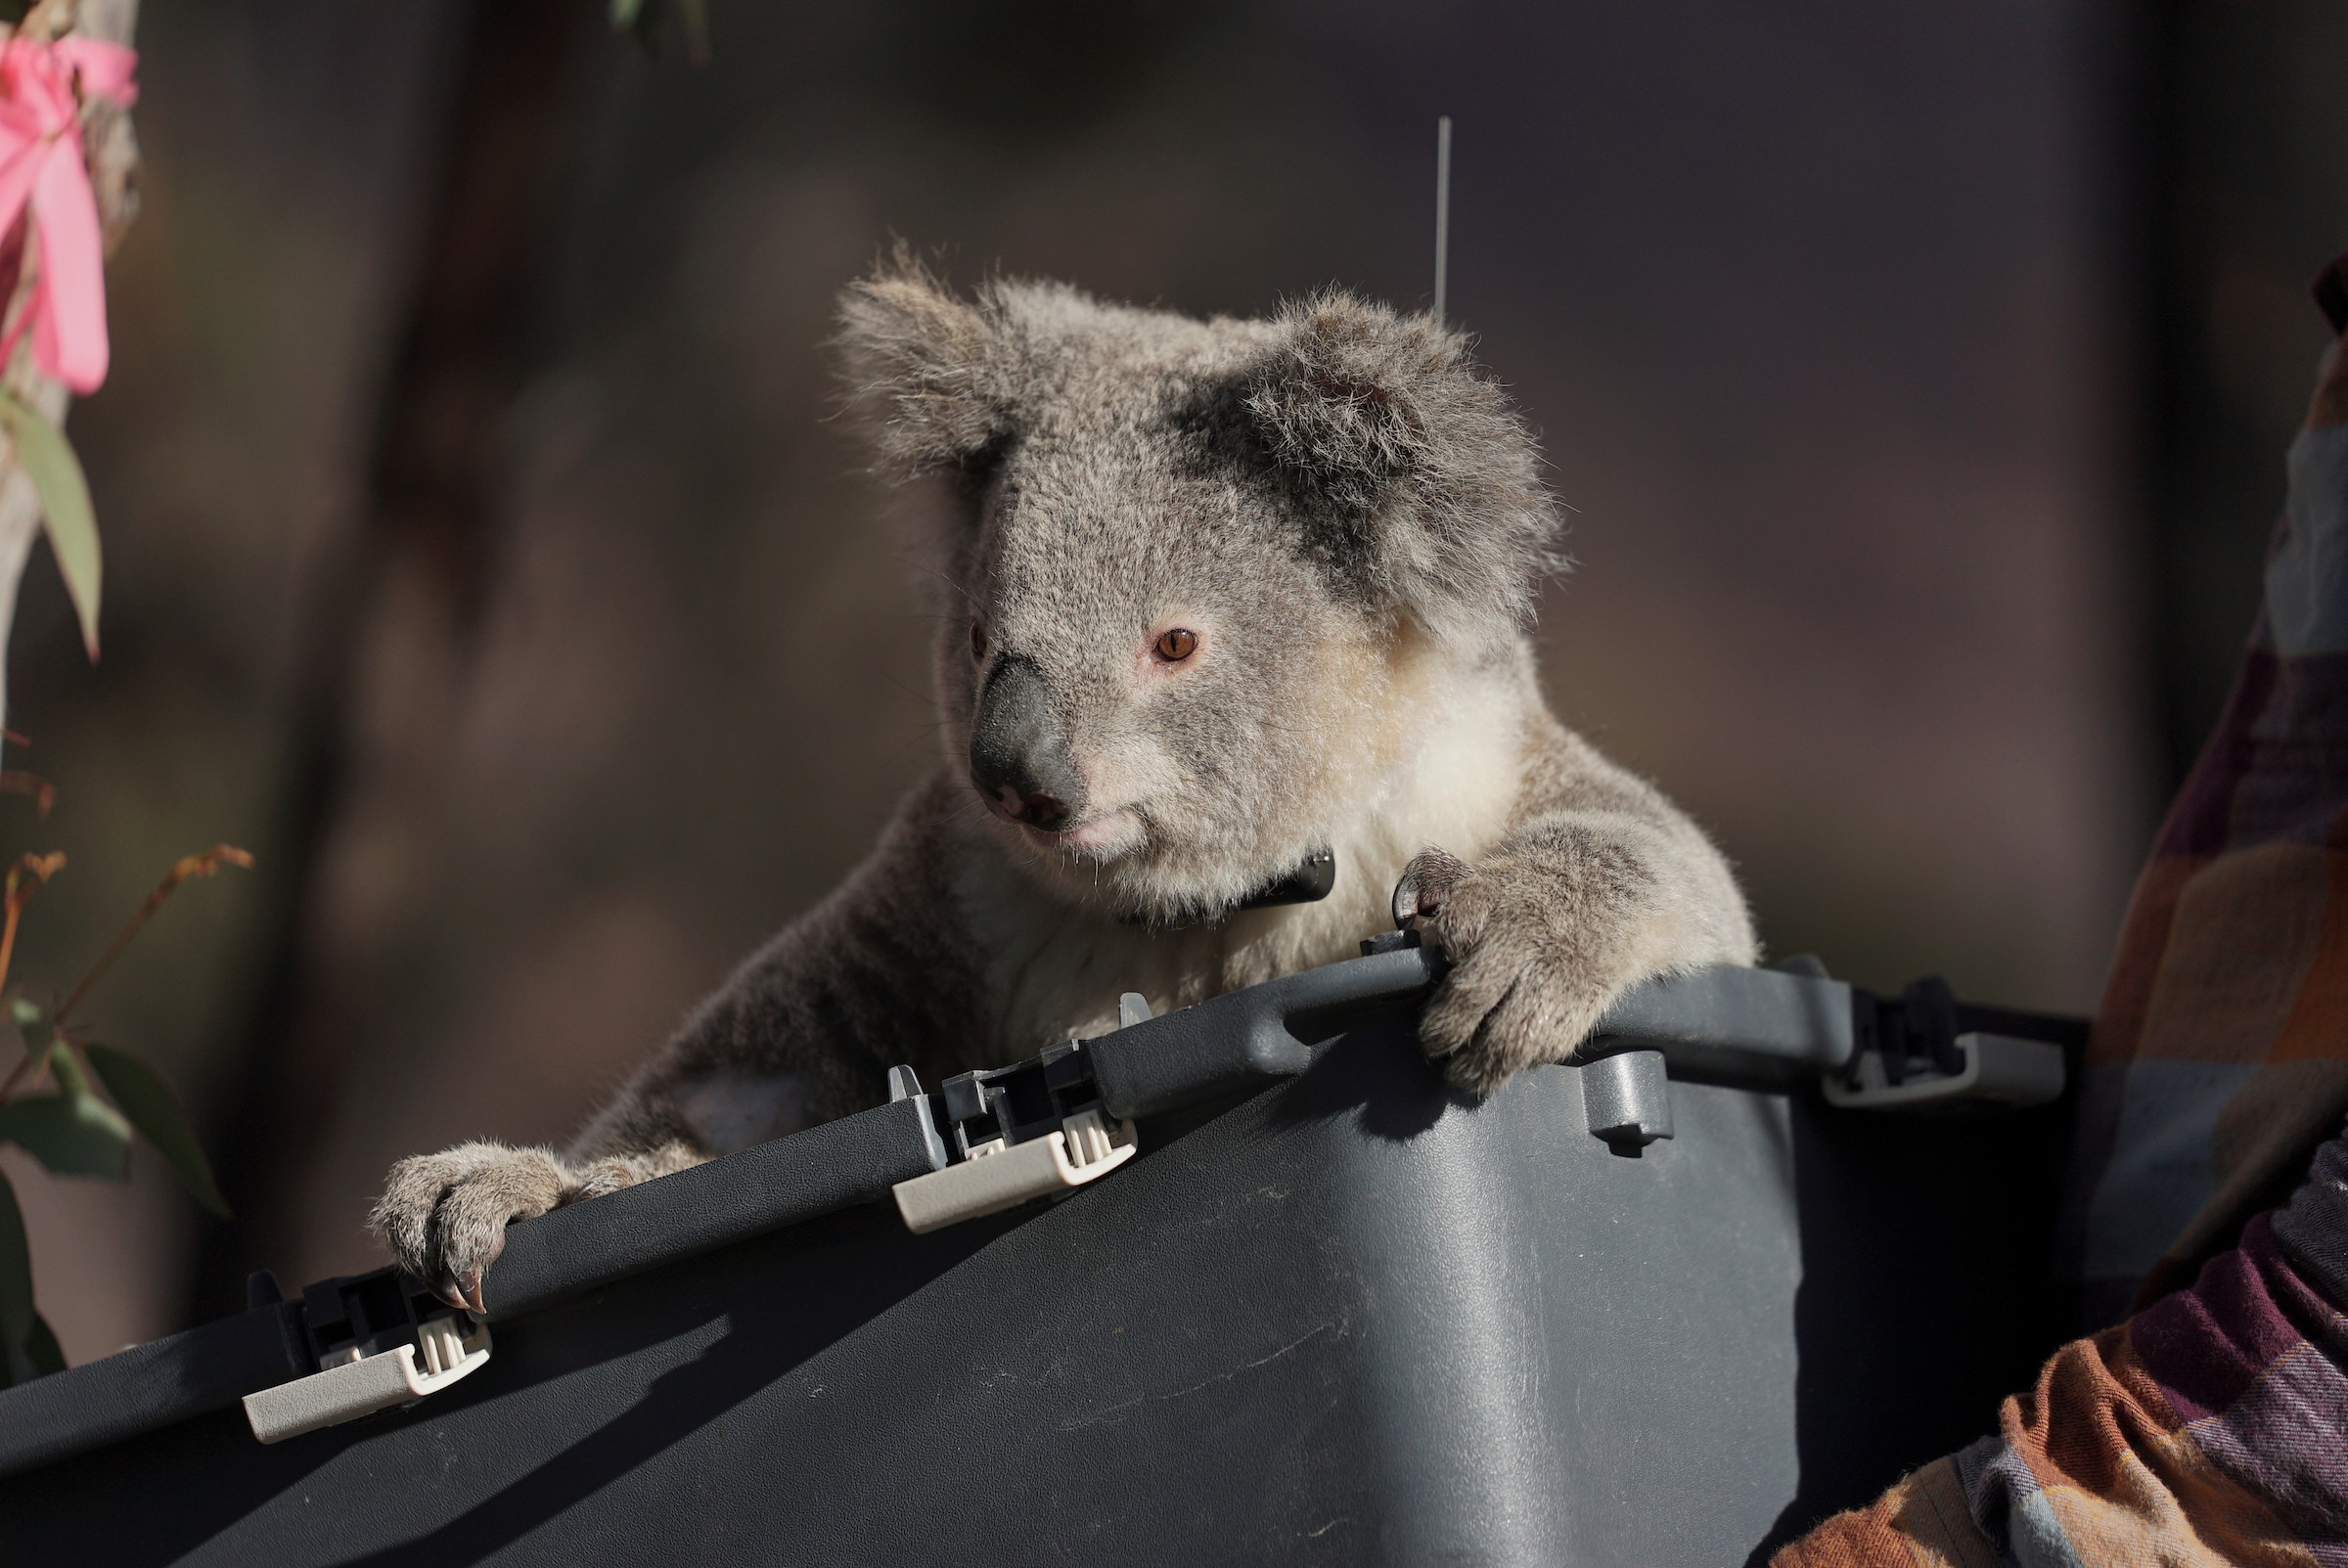 Forrest funds give koalas a fighting chance